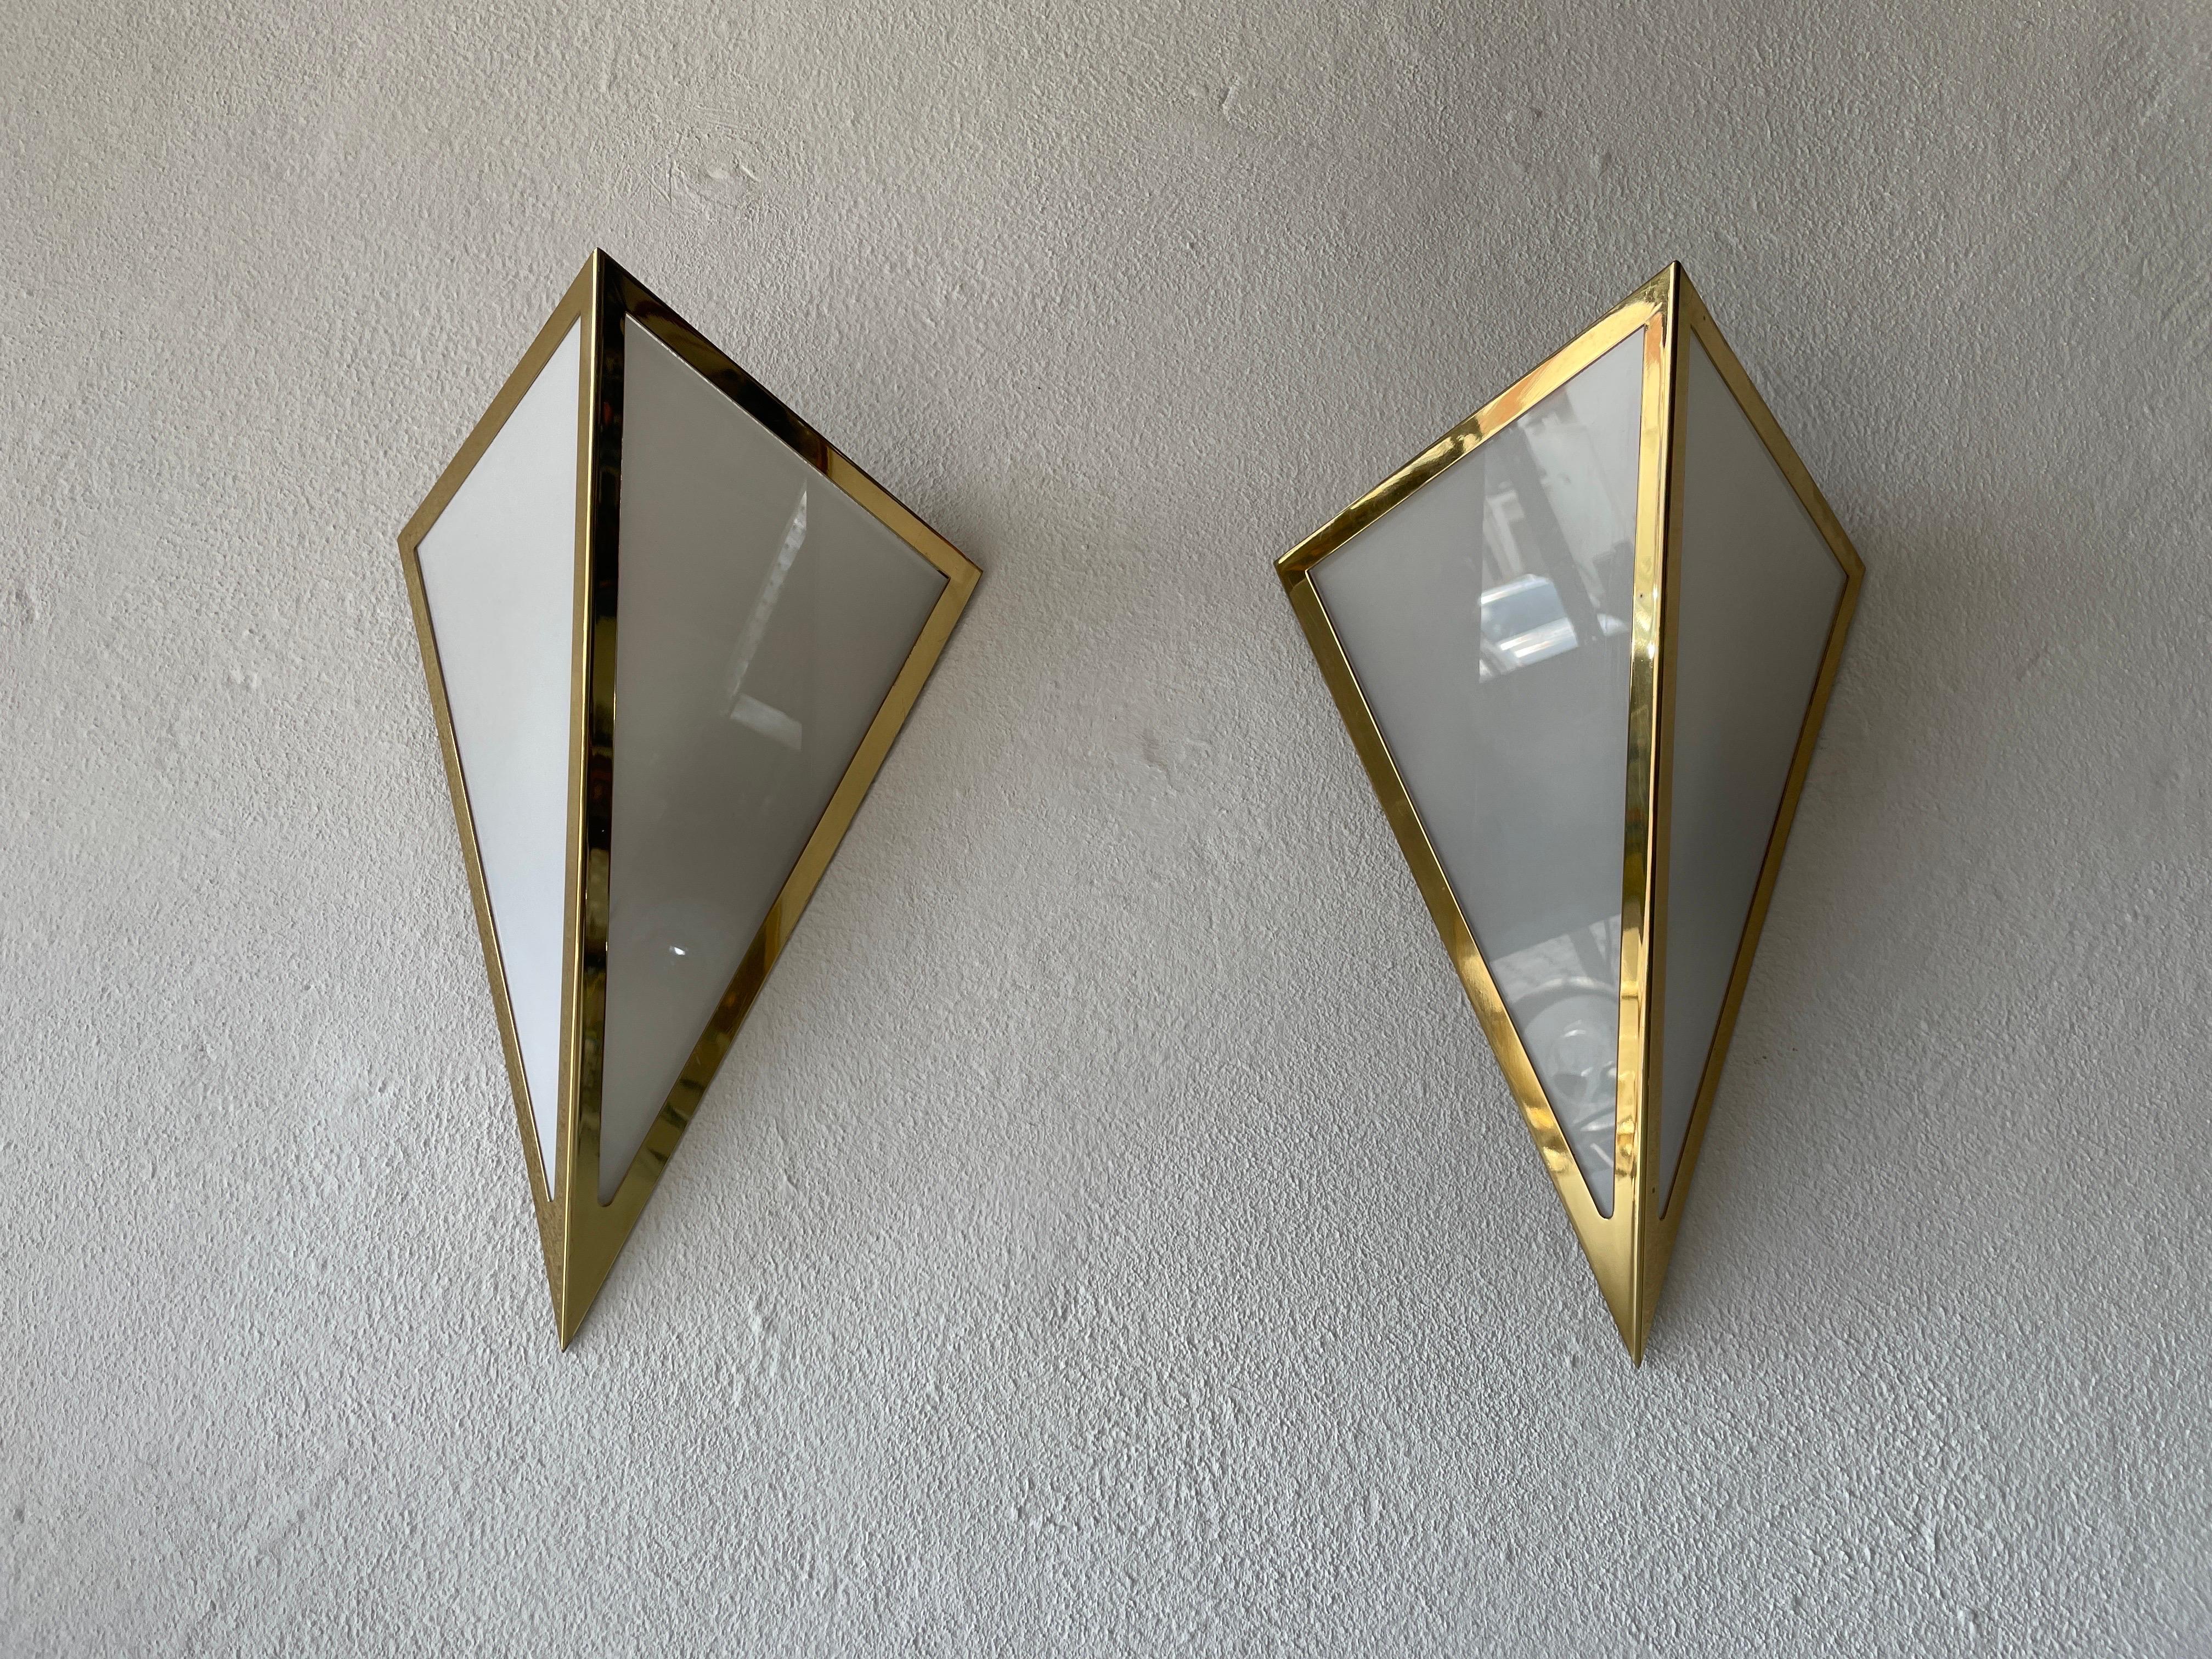 Triangle Design Opal Glass and Gold Metal Pair of Sconces by WKR, 1970s, Germany

Very elegant and Minimalist wall lamps

We have 3 lamps. I made the listing as a pair. But there is a third single lamp if you wish

Lamps are in very good